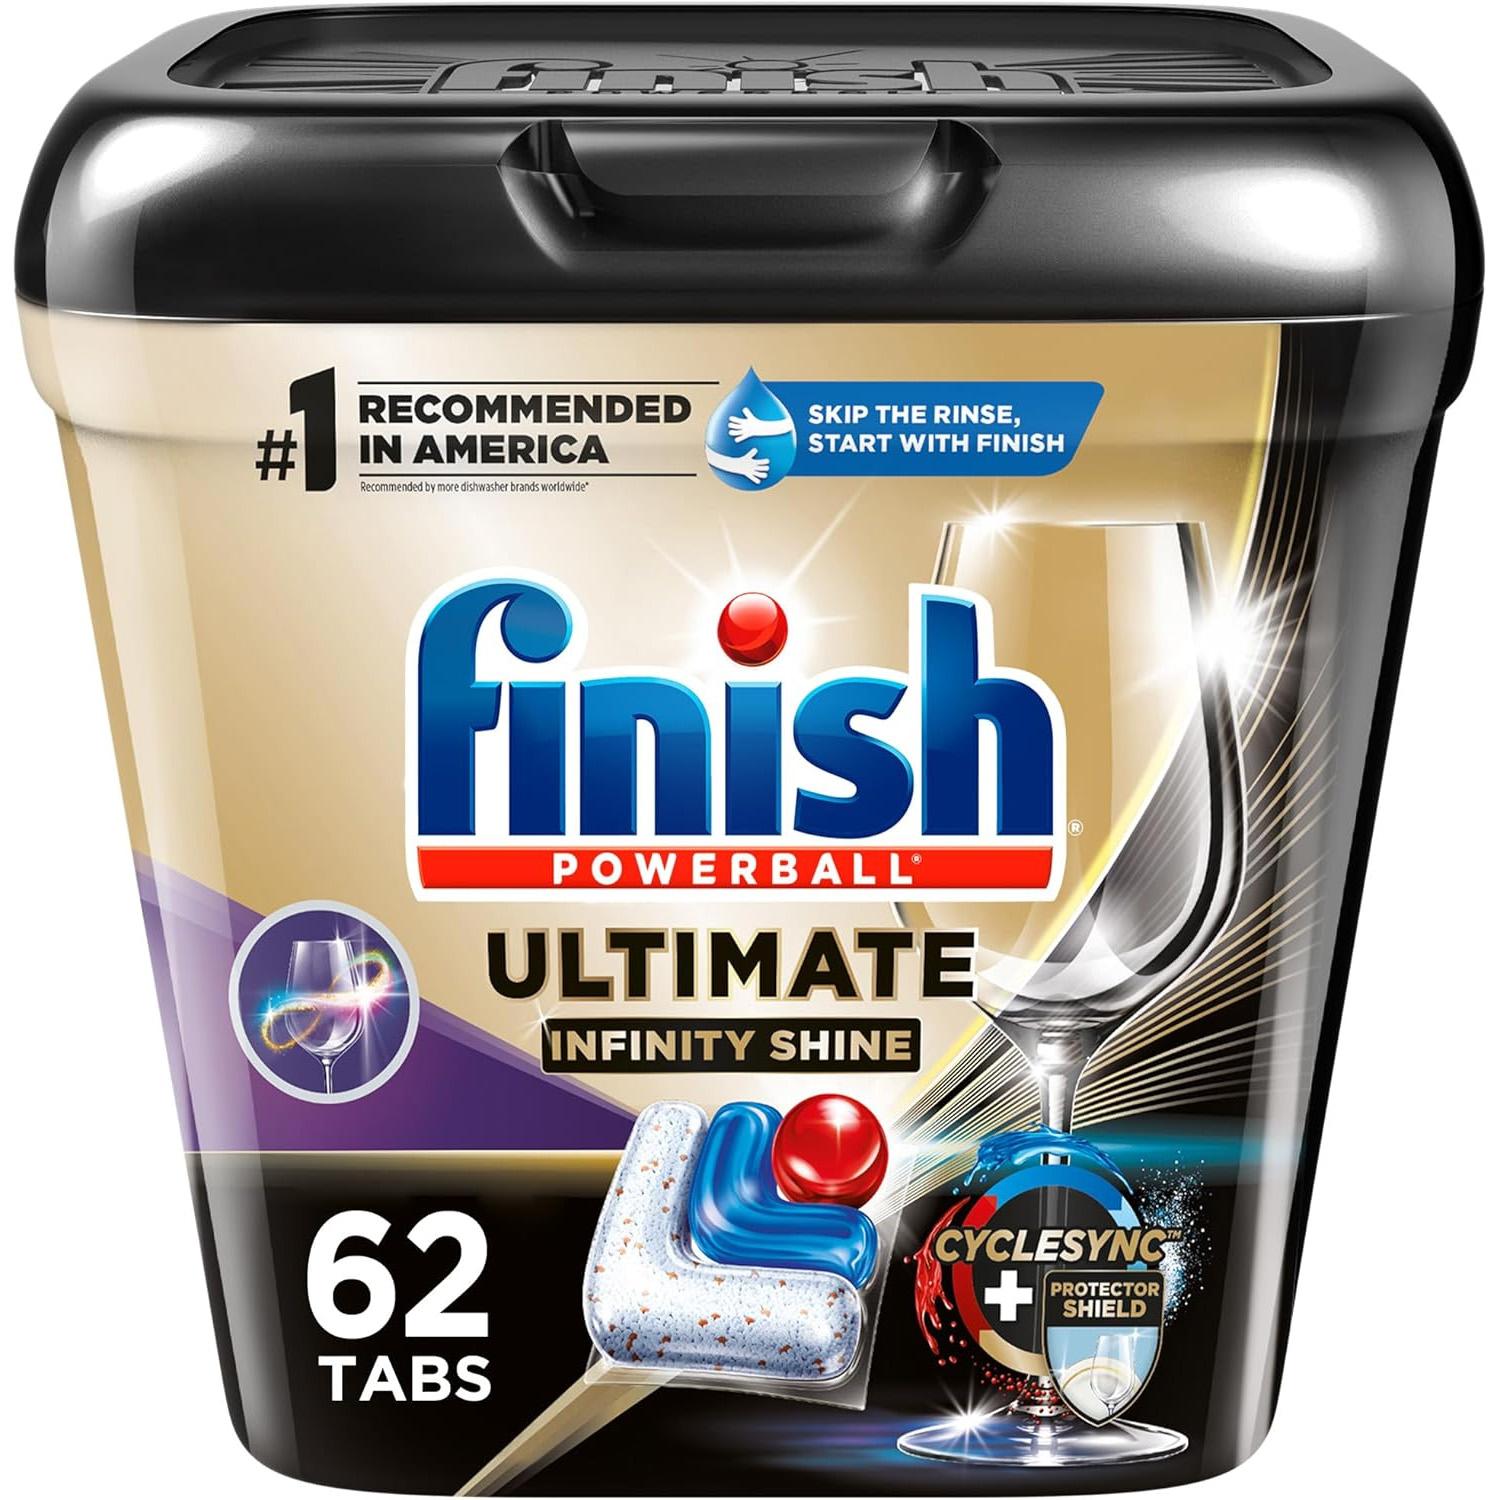 Finish Ultimate Plus Infinity Shine Dishwasher Detergent Tabs 64 Pack for $15.60